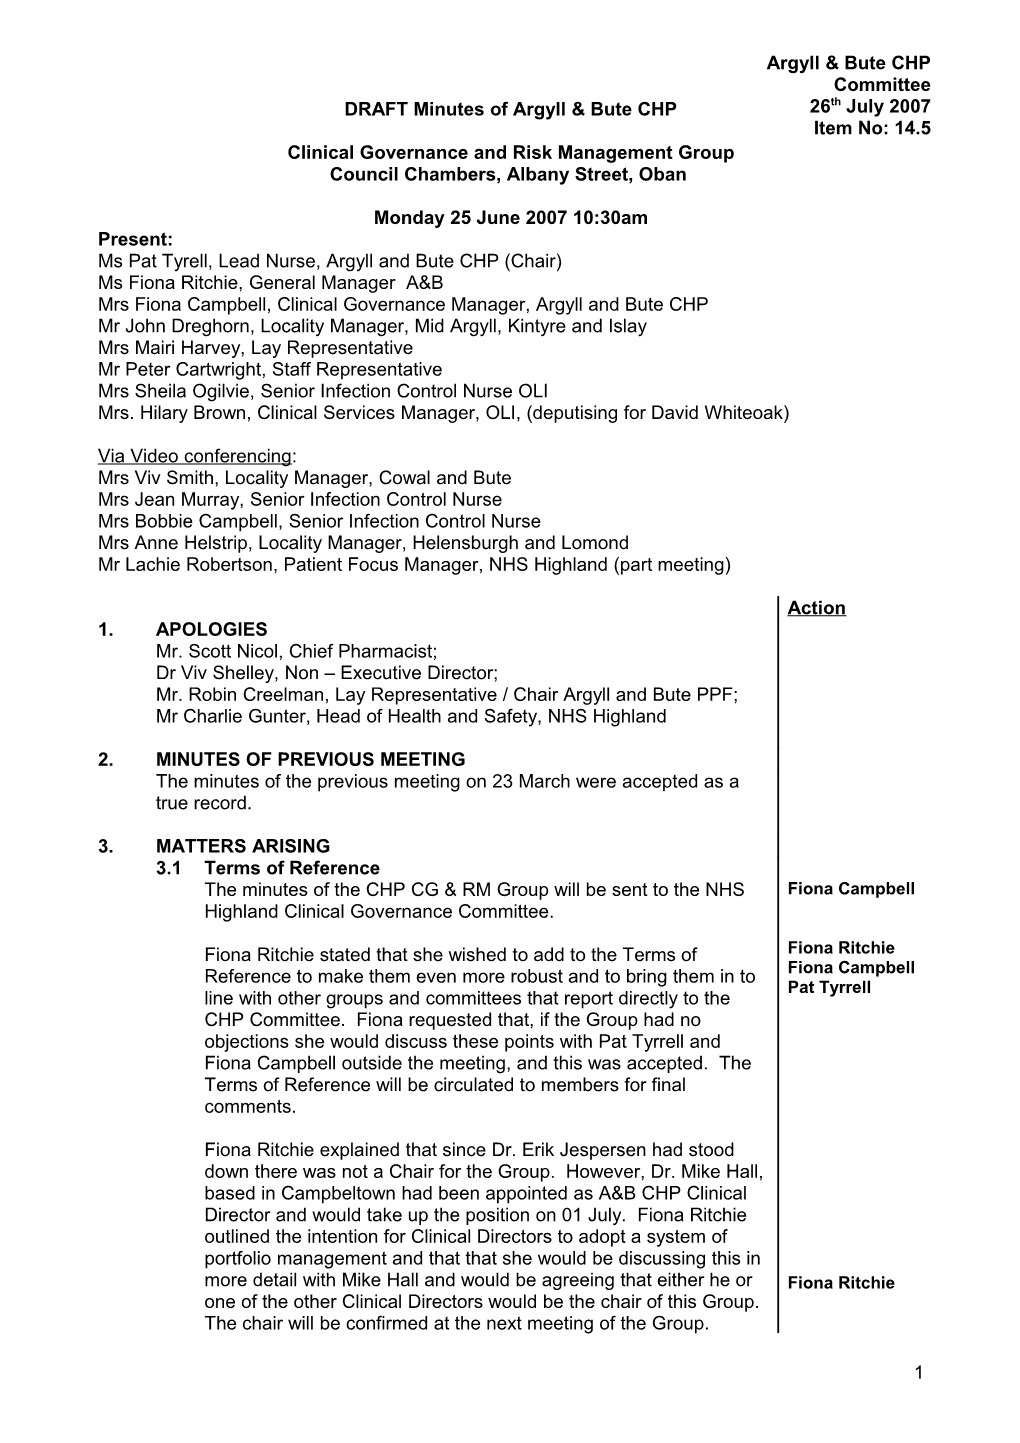 DRAFT Minutes of Argyll & Bute CHP